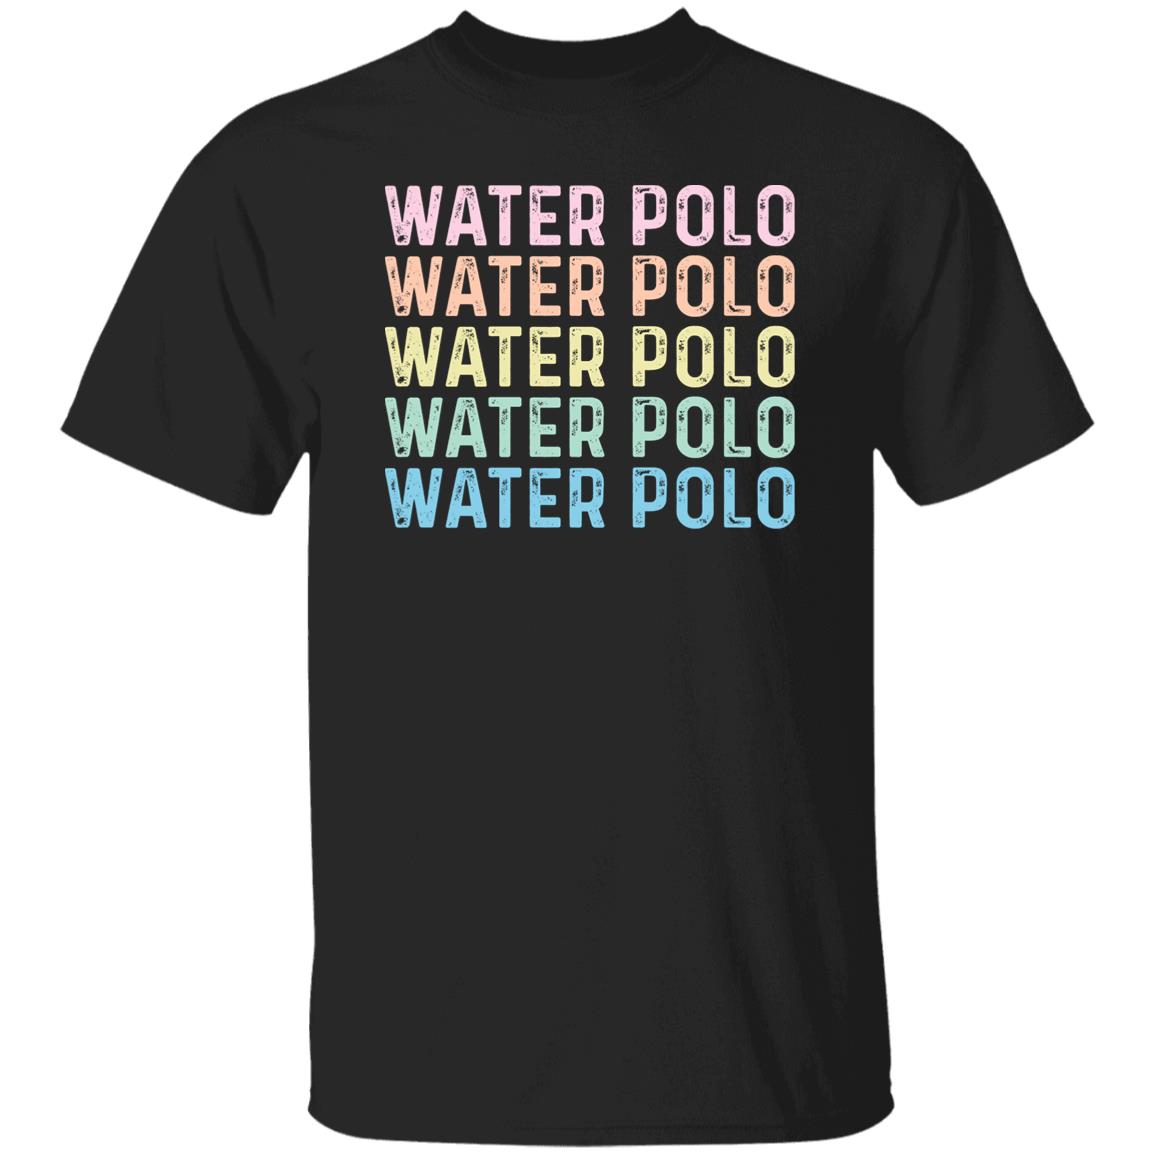 Water Polo Unisex Shirt, Water polo team tee Black S-2XL-Black-Family-Gift-Planet